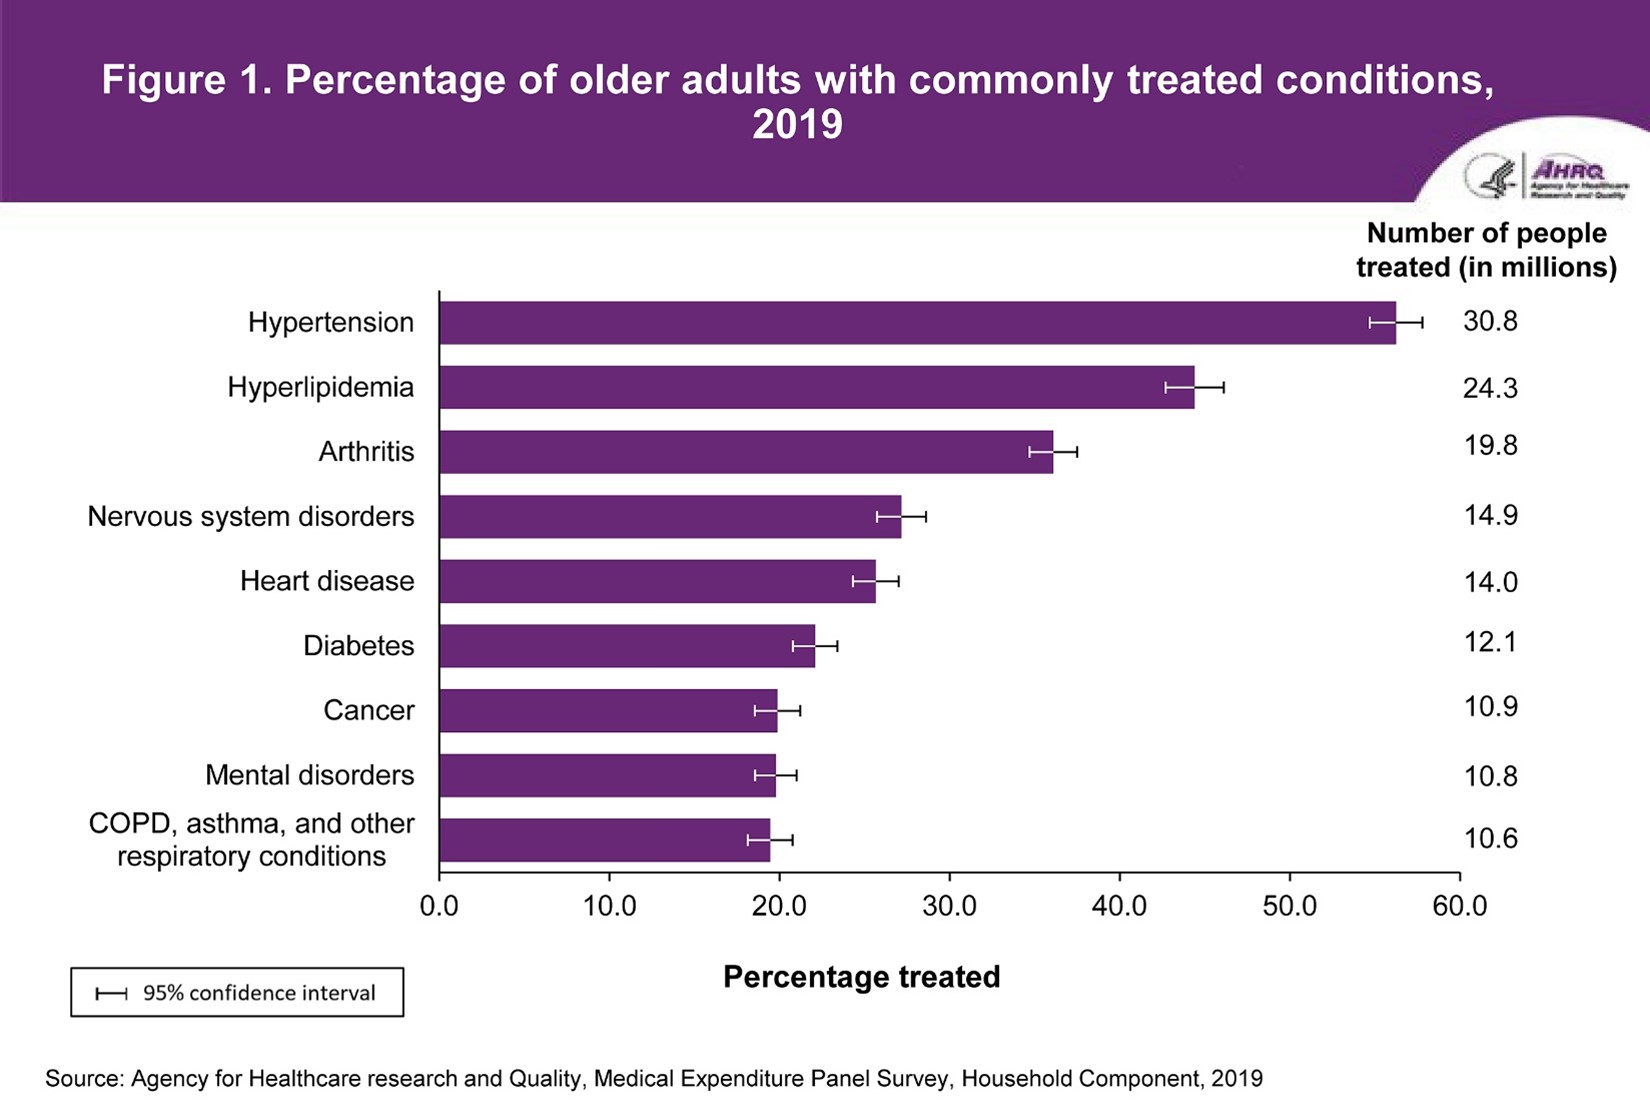 Figure displays: Percentage of older adults with commonly treated conditions, 2019